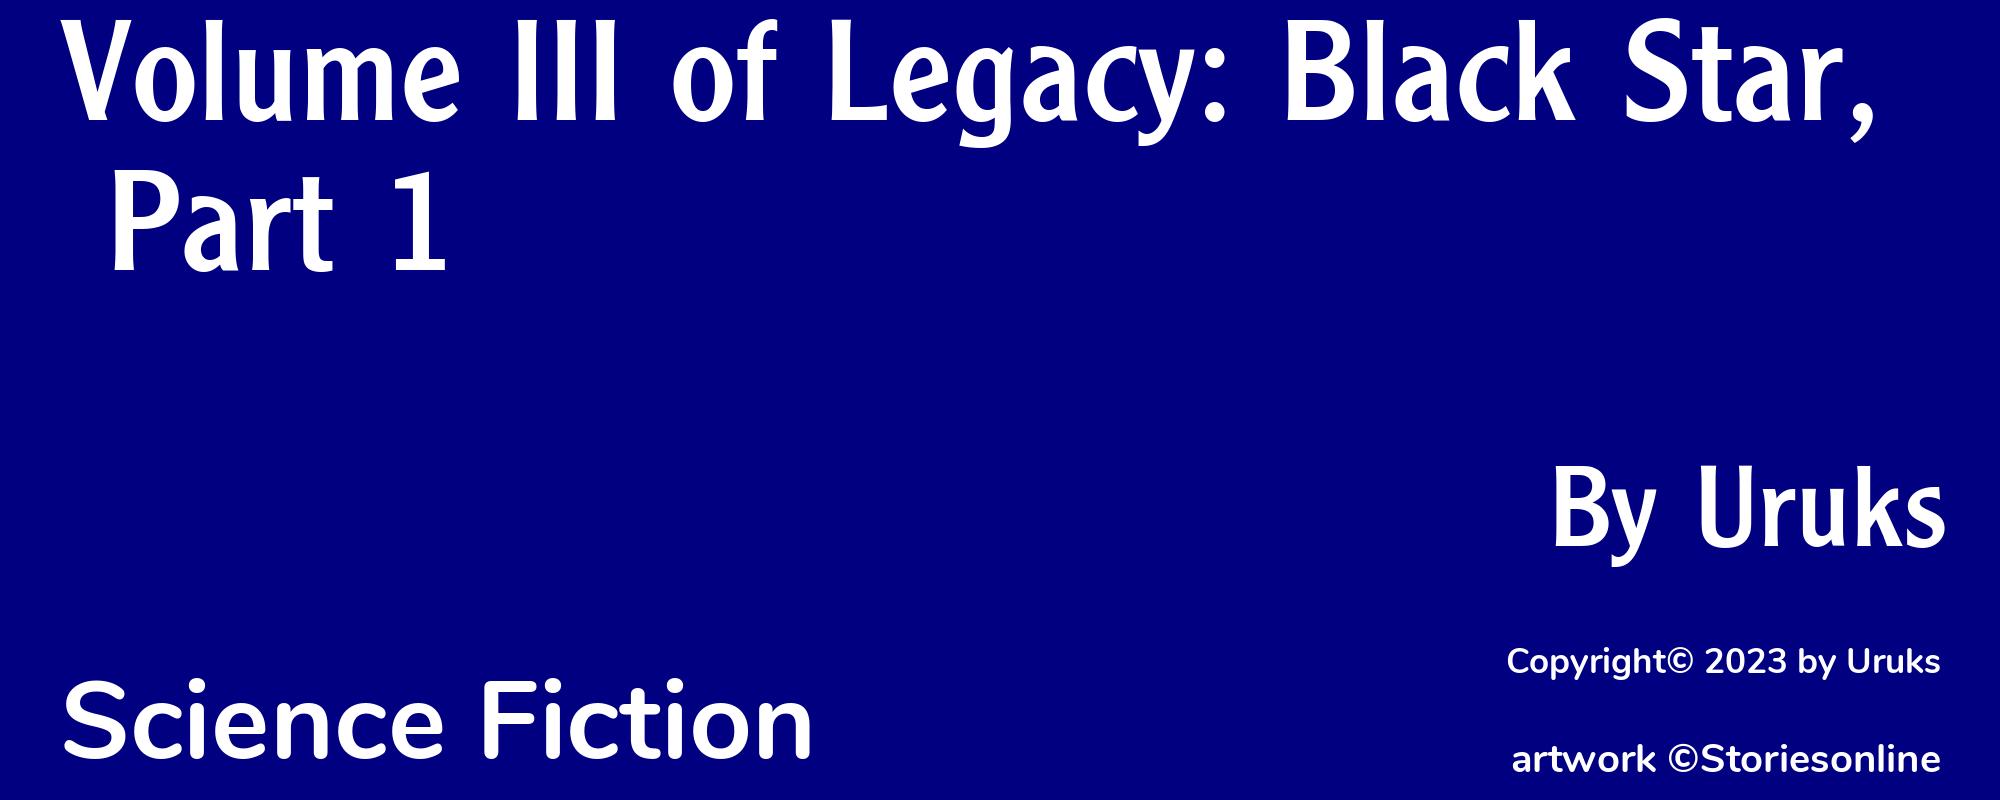 Volume III of Legacy: Black Star, Part 1 - Cover